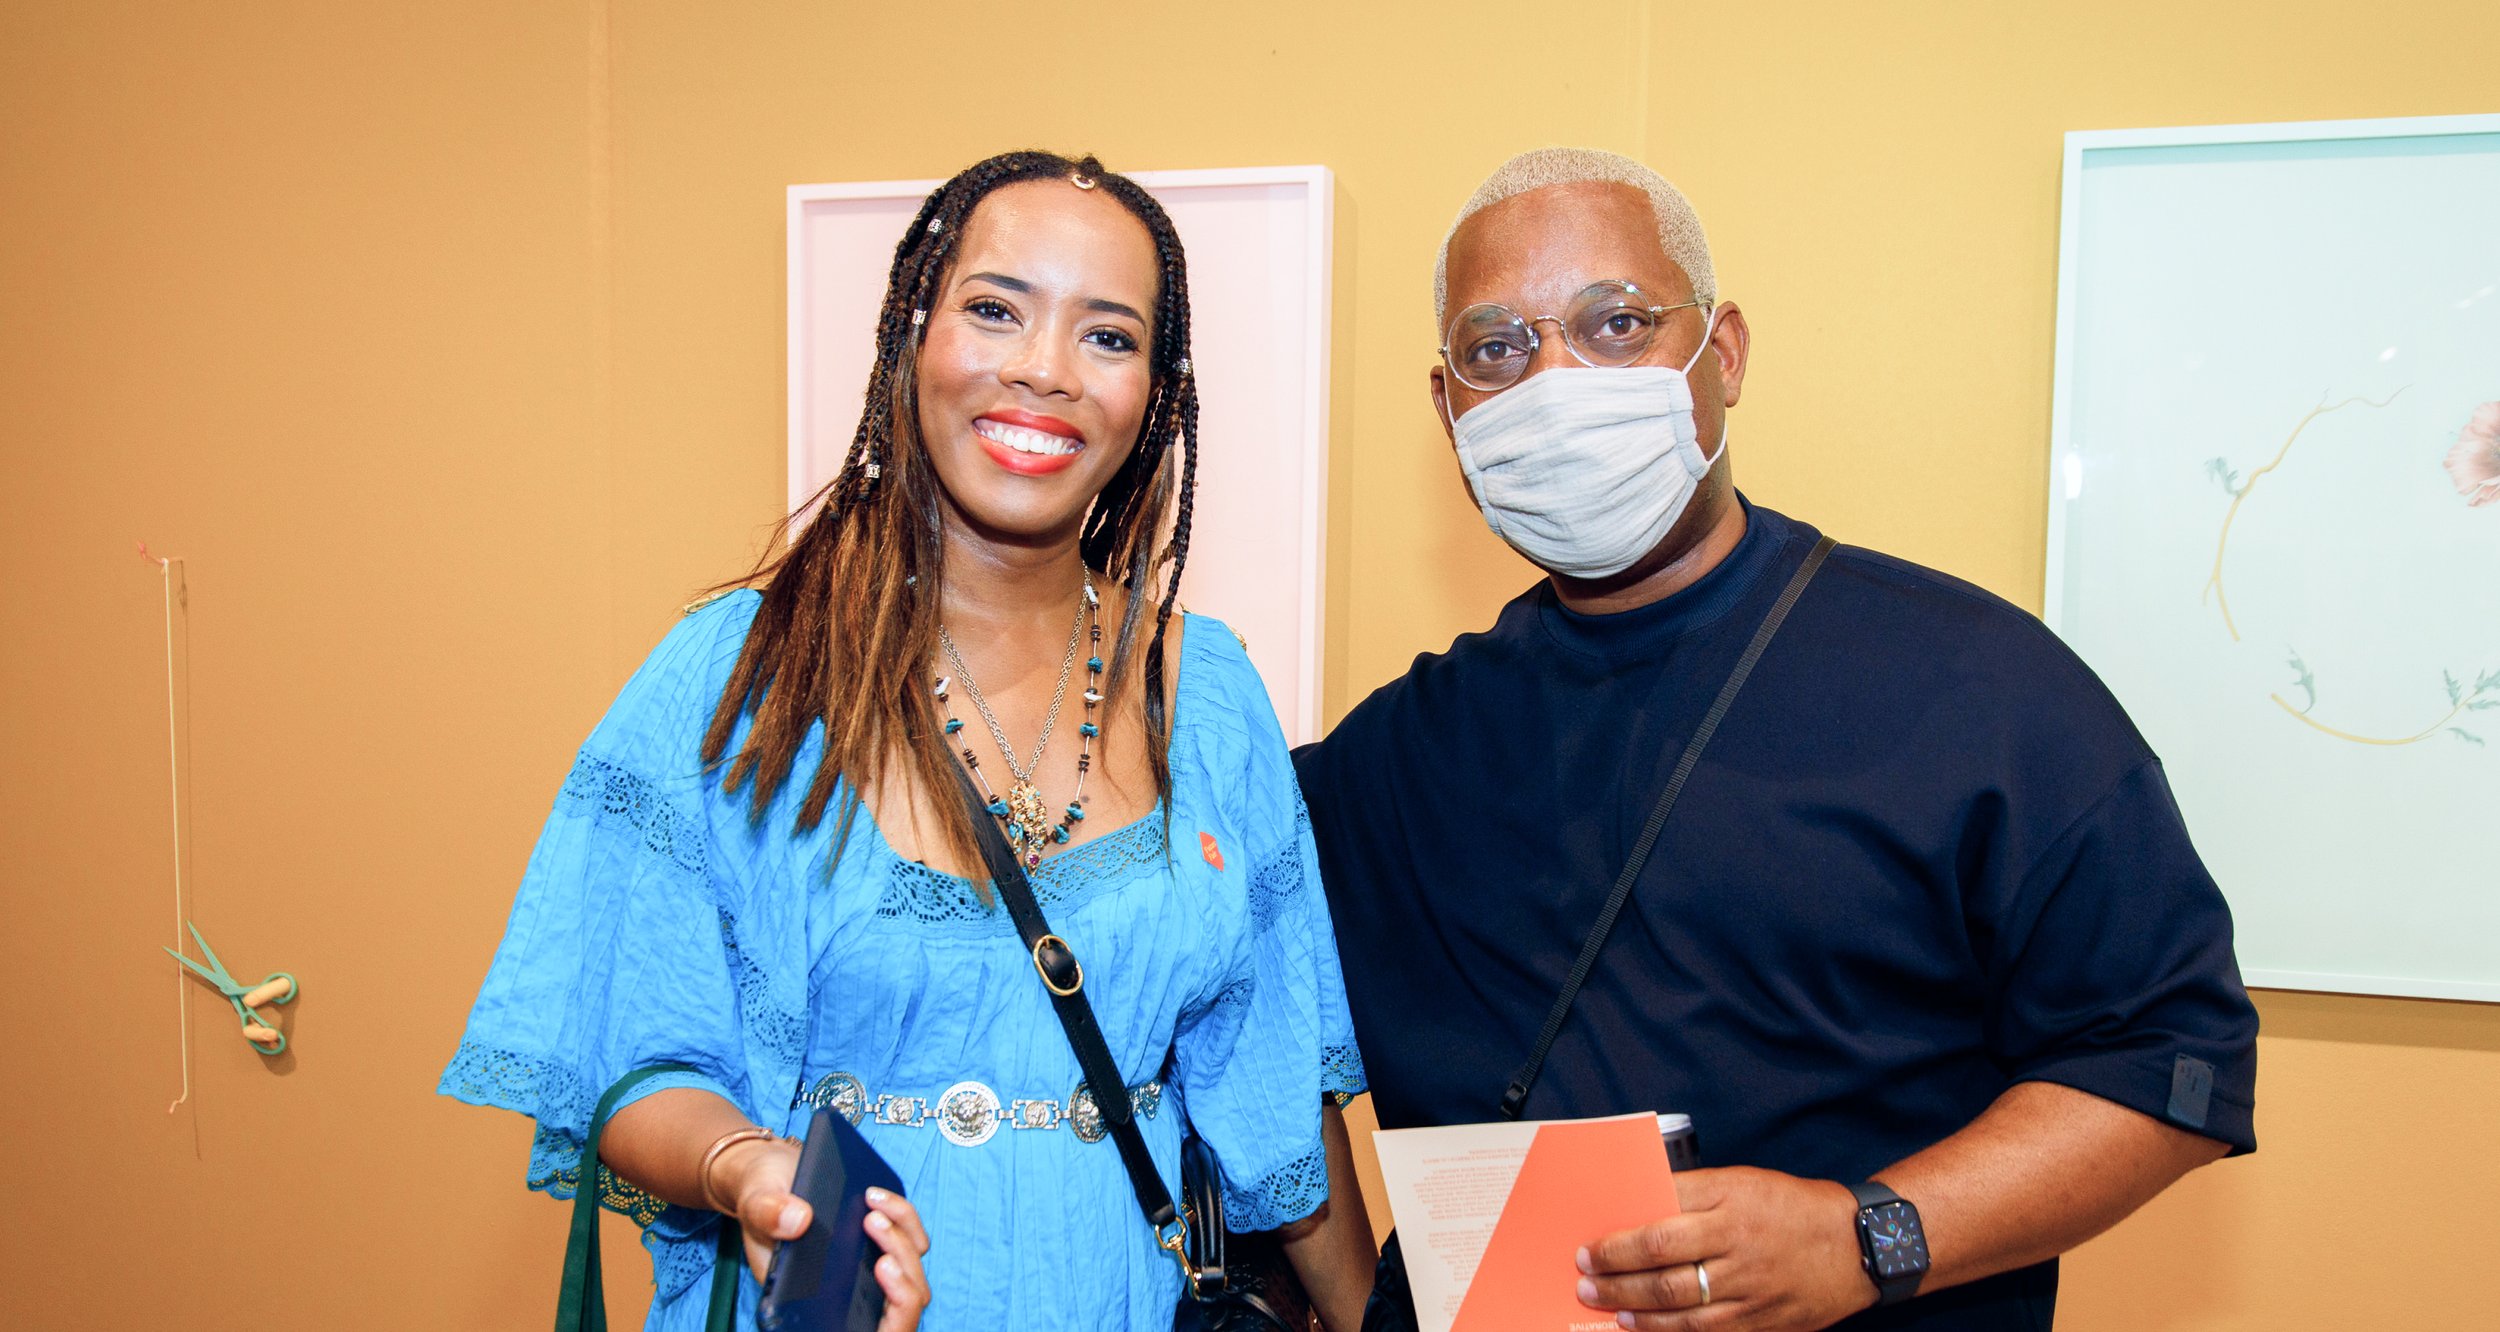  Future Fair Advisory Board Member Amani Olu (right) with guest. © David Willems Photography 